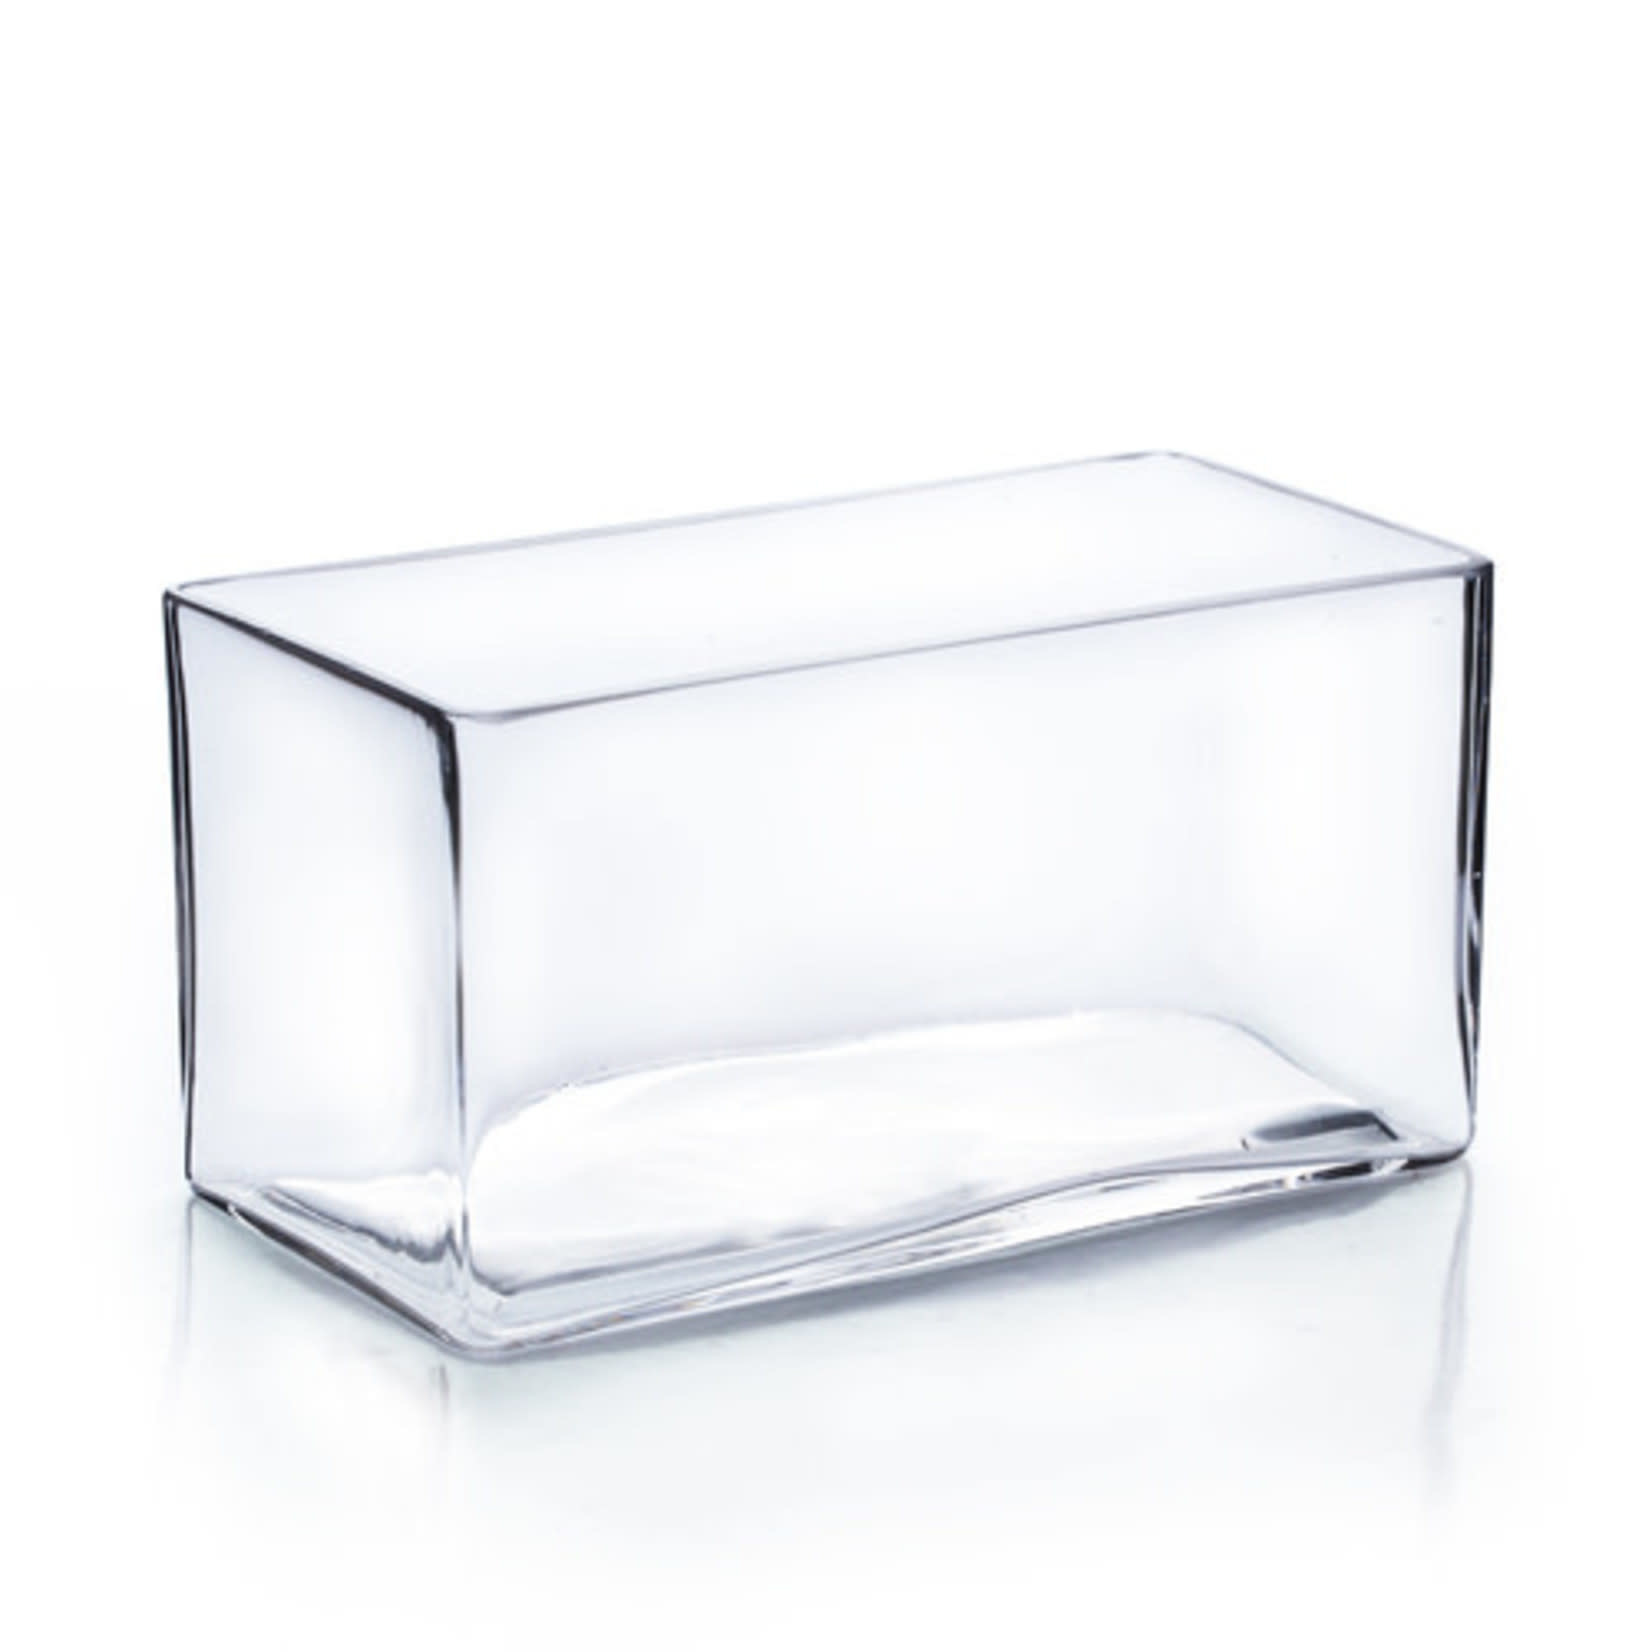 6"H X 10"L X 4"W CLEAR GLASS LOW RECTANGLE